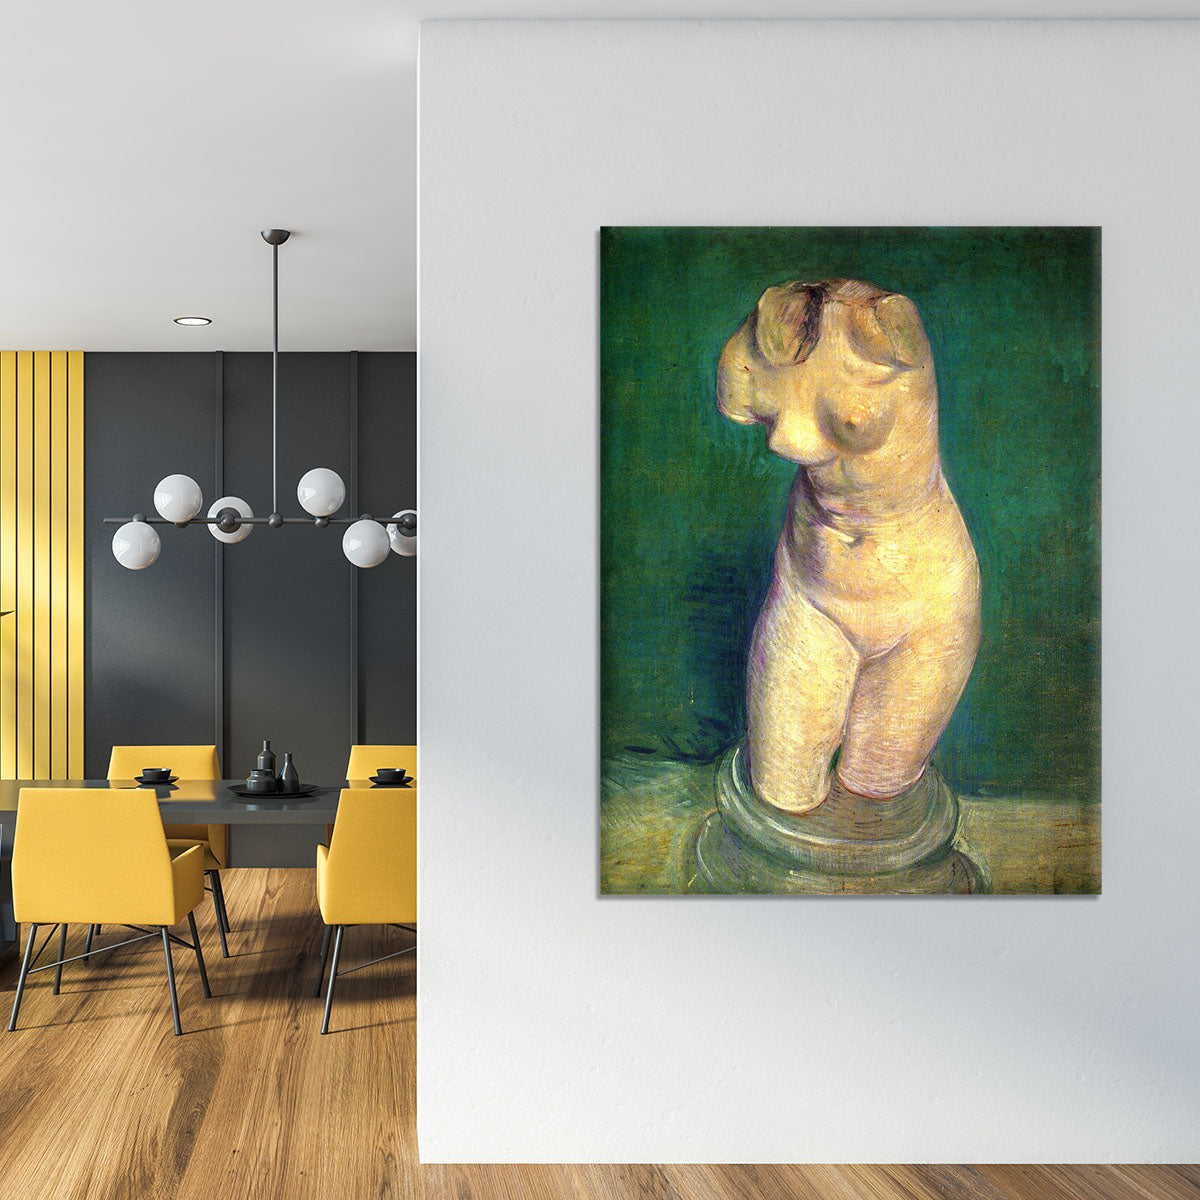 Plaster Statuette of a Female Torso by Van Gogh Canvas Print or Poster - Canvas Art Rocks - 4